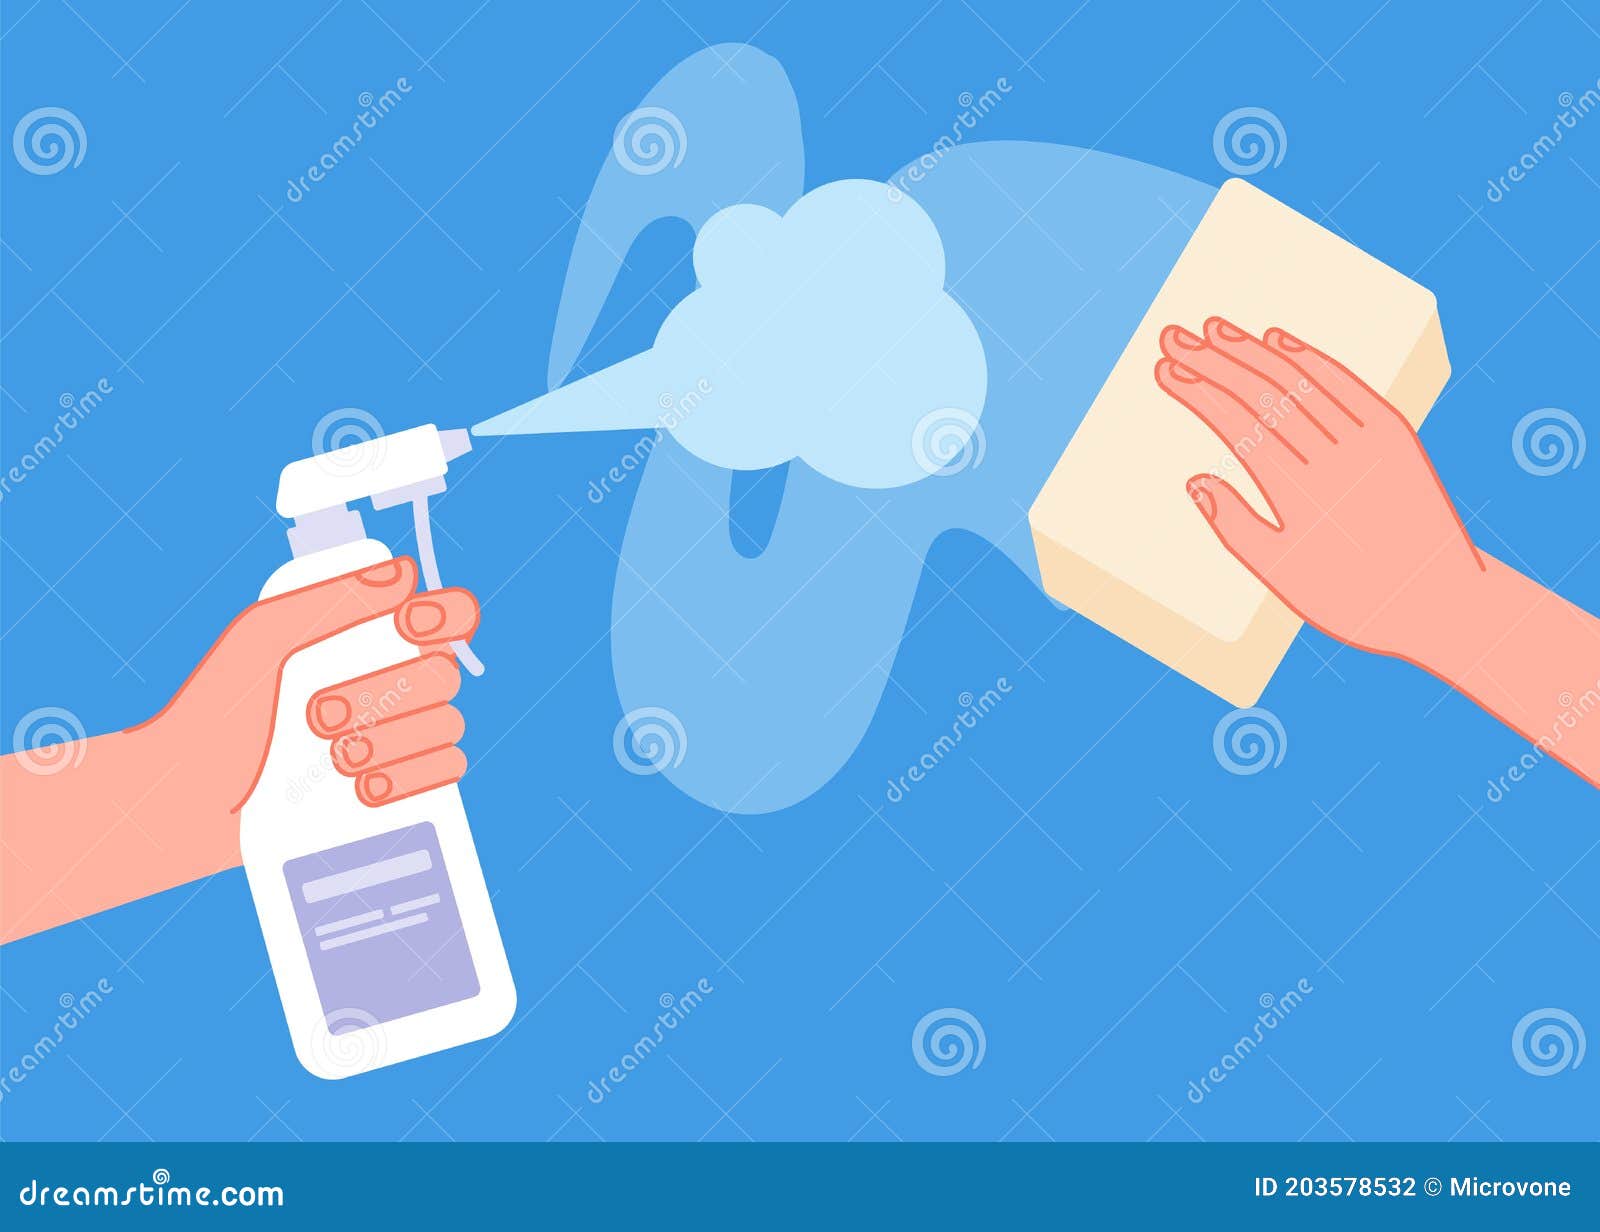 Cleaning Surface. Clean Table, Wipe Sanitise or Disinfect Desk. Hand ...